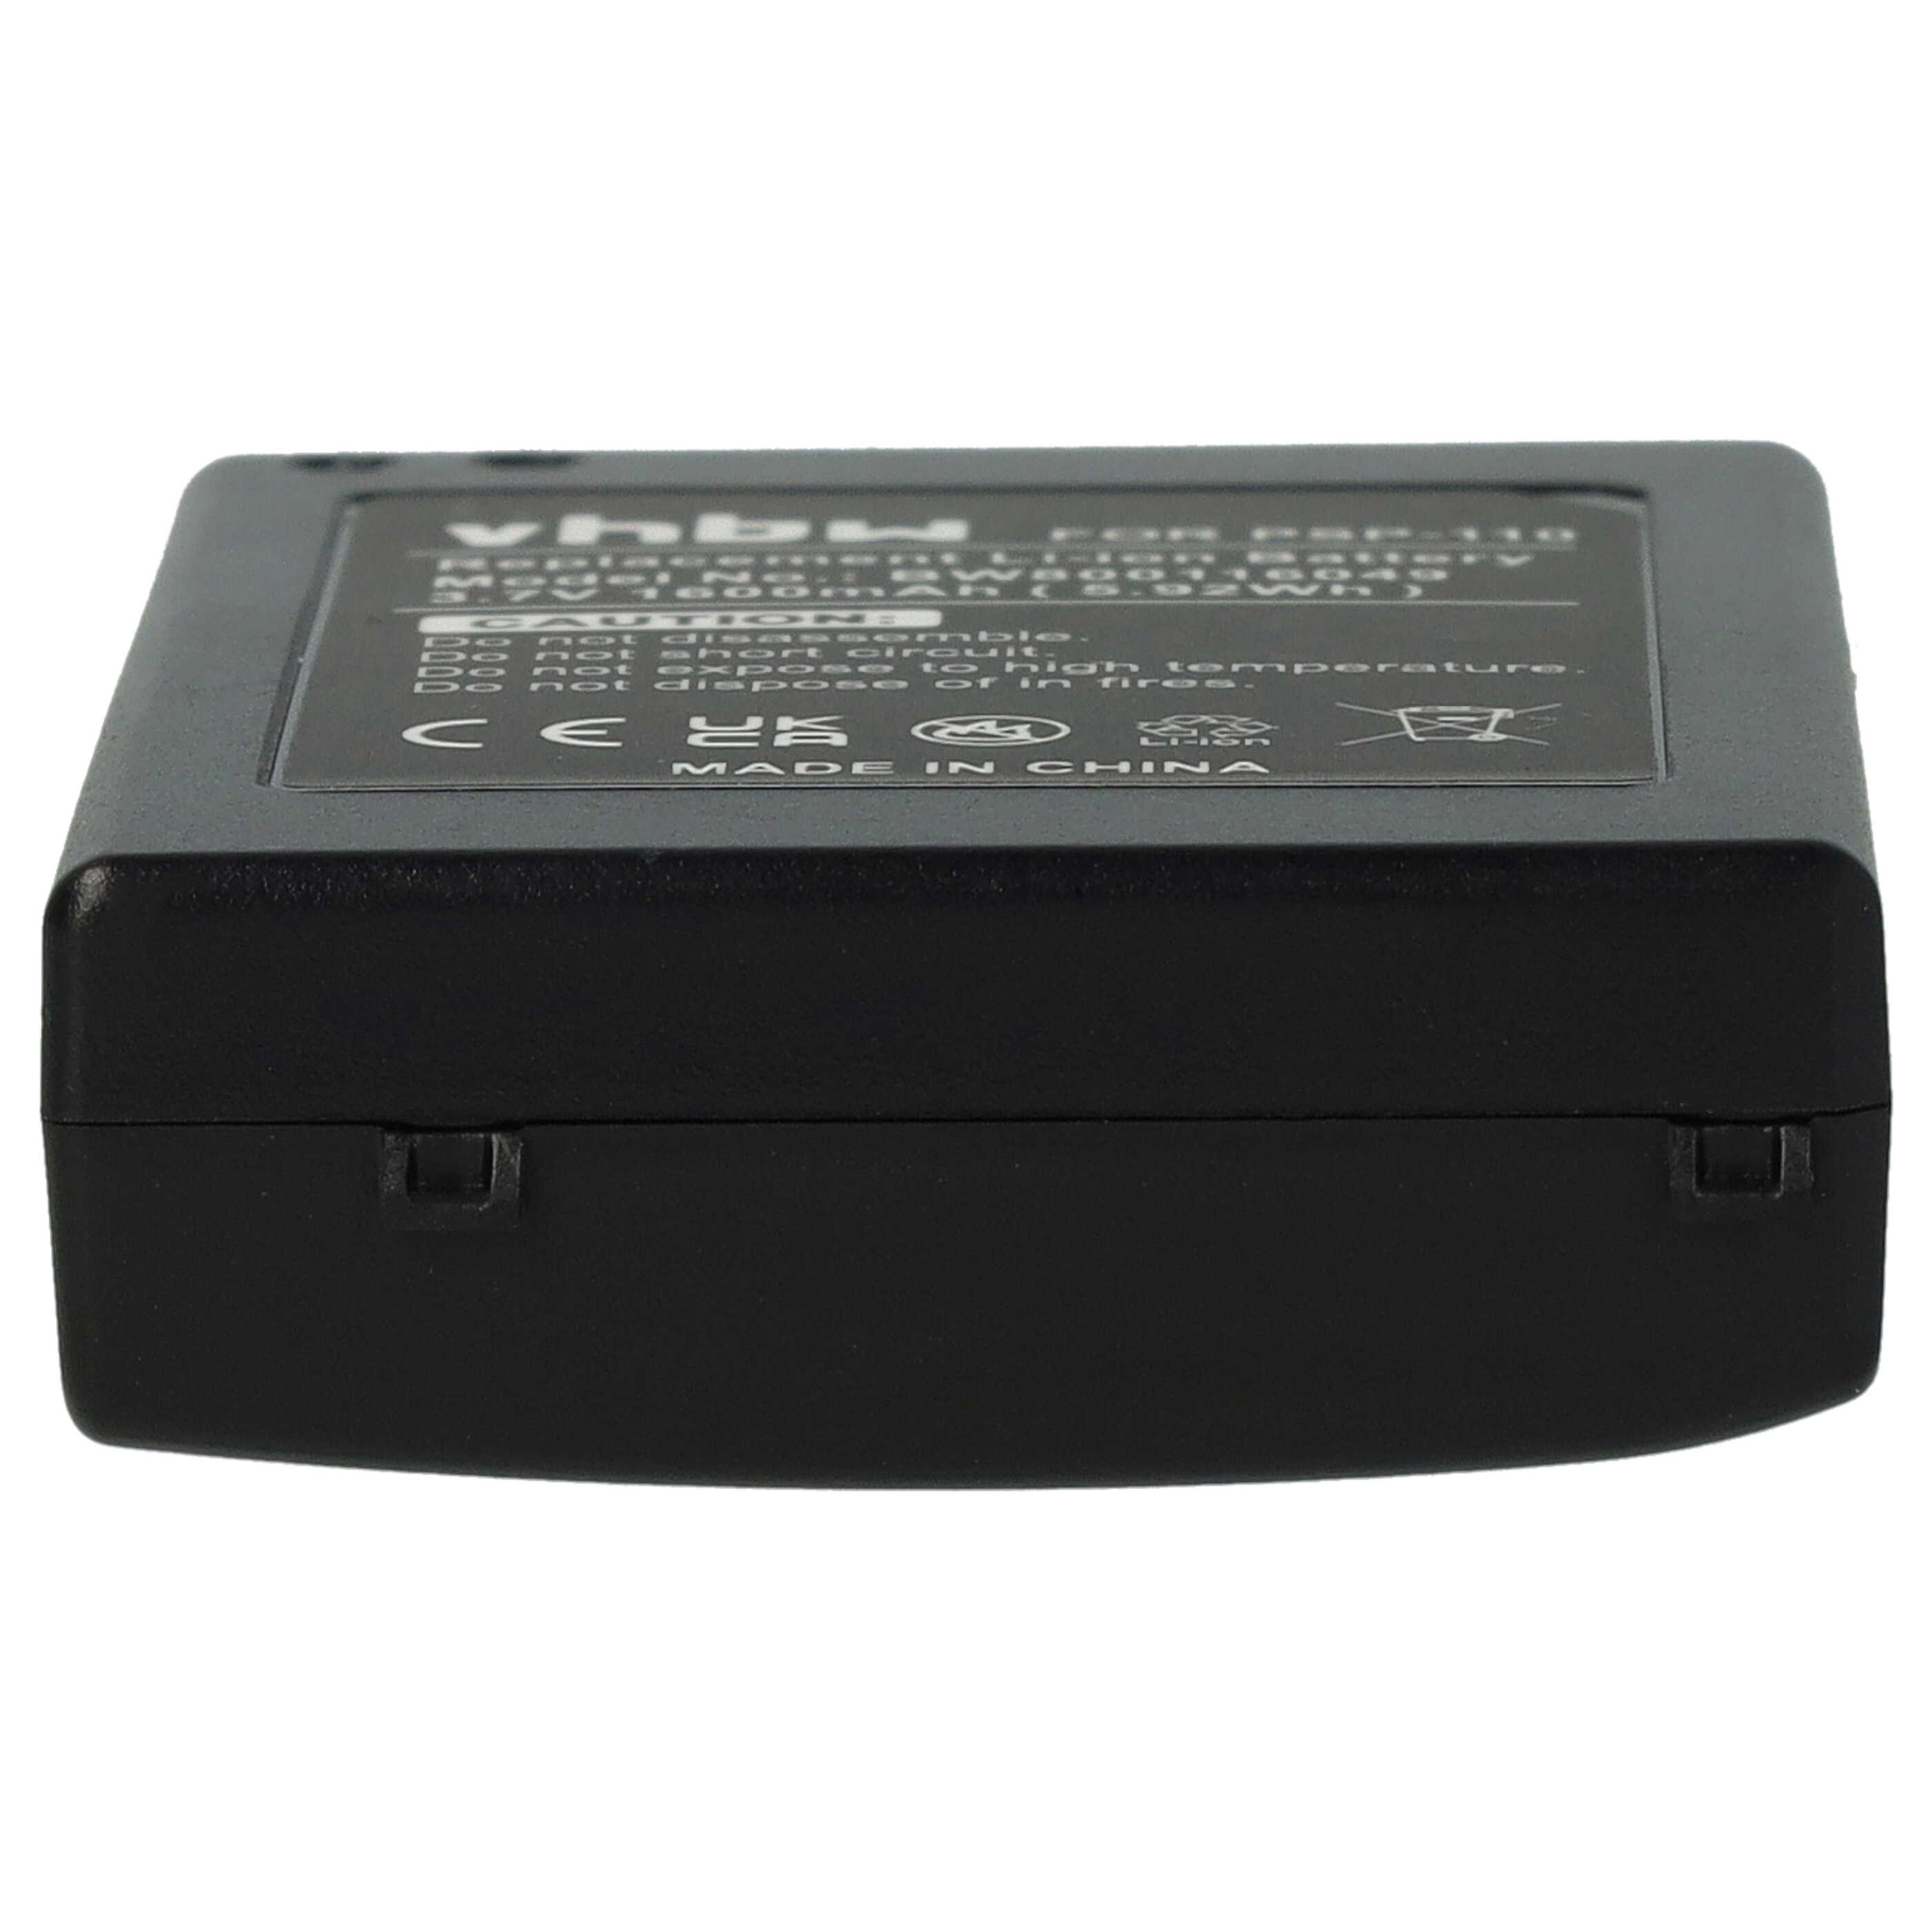  Games Console replaces Sony PSP-110, PSP-280G for Sony - 1600mAh, 3.6V